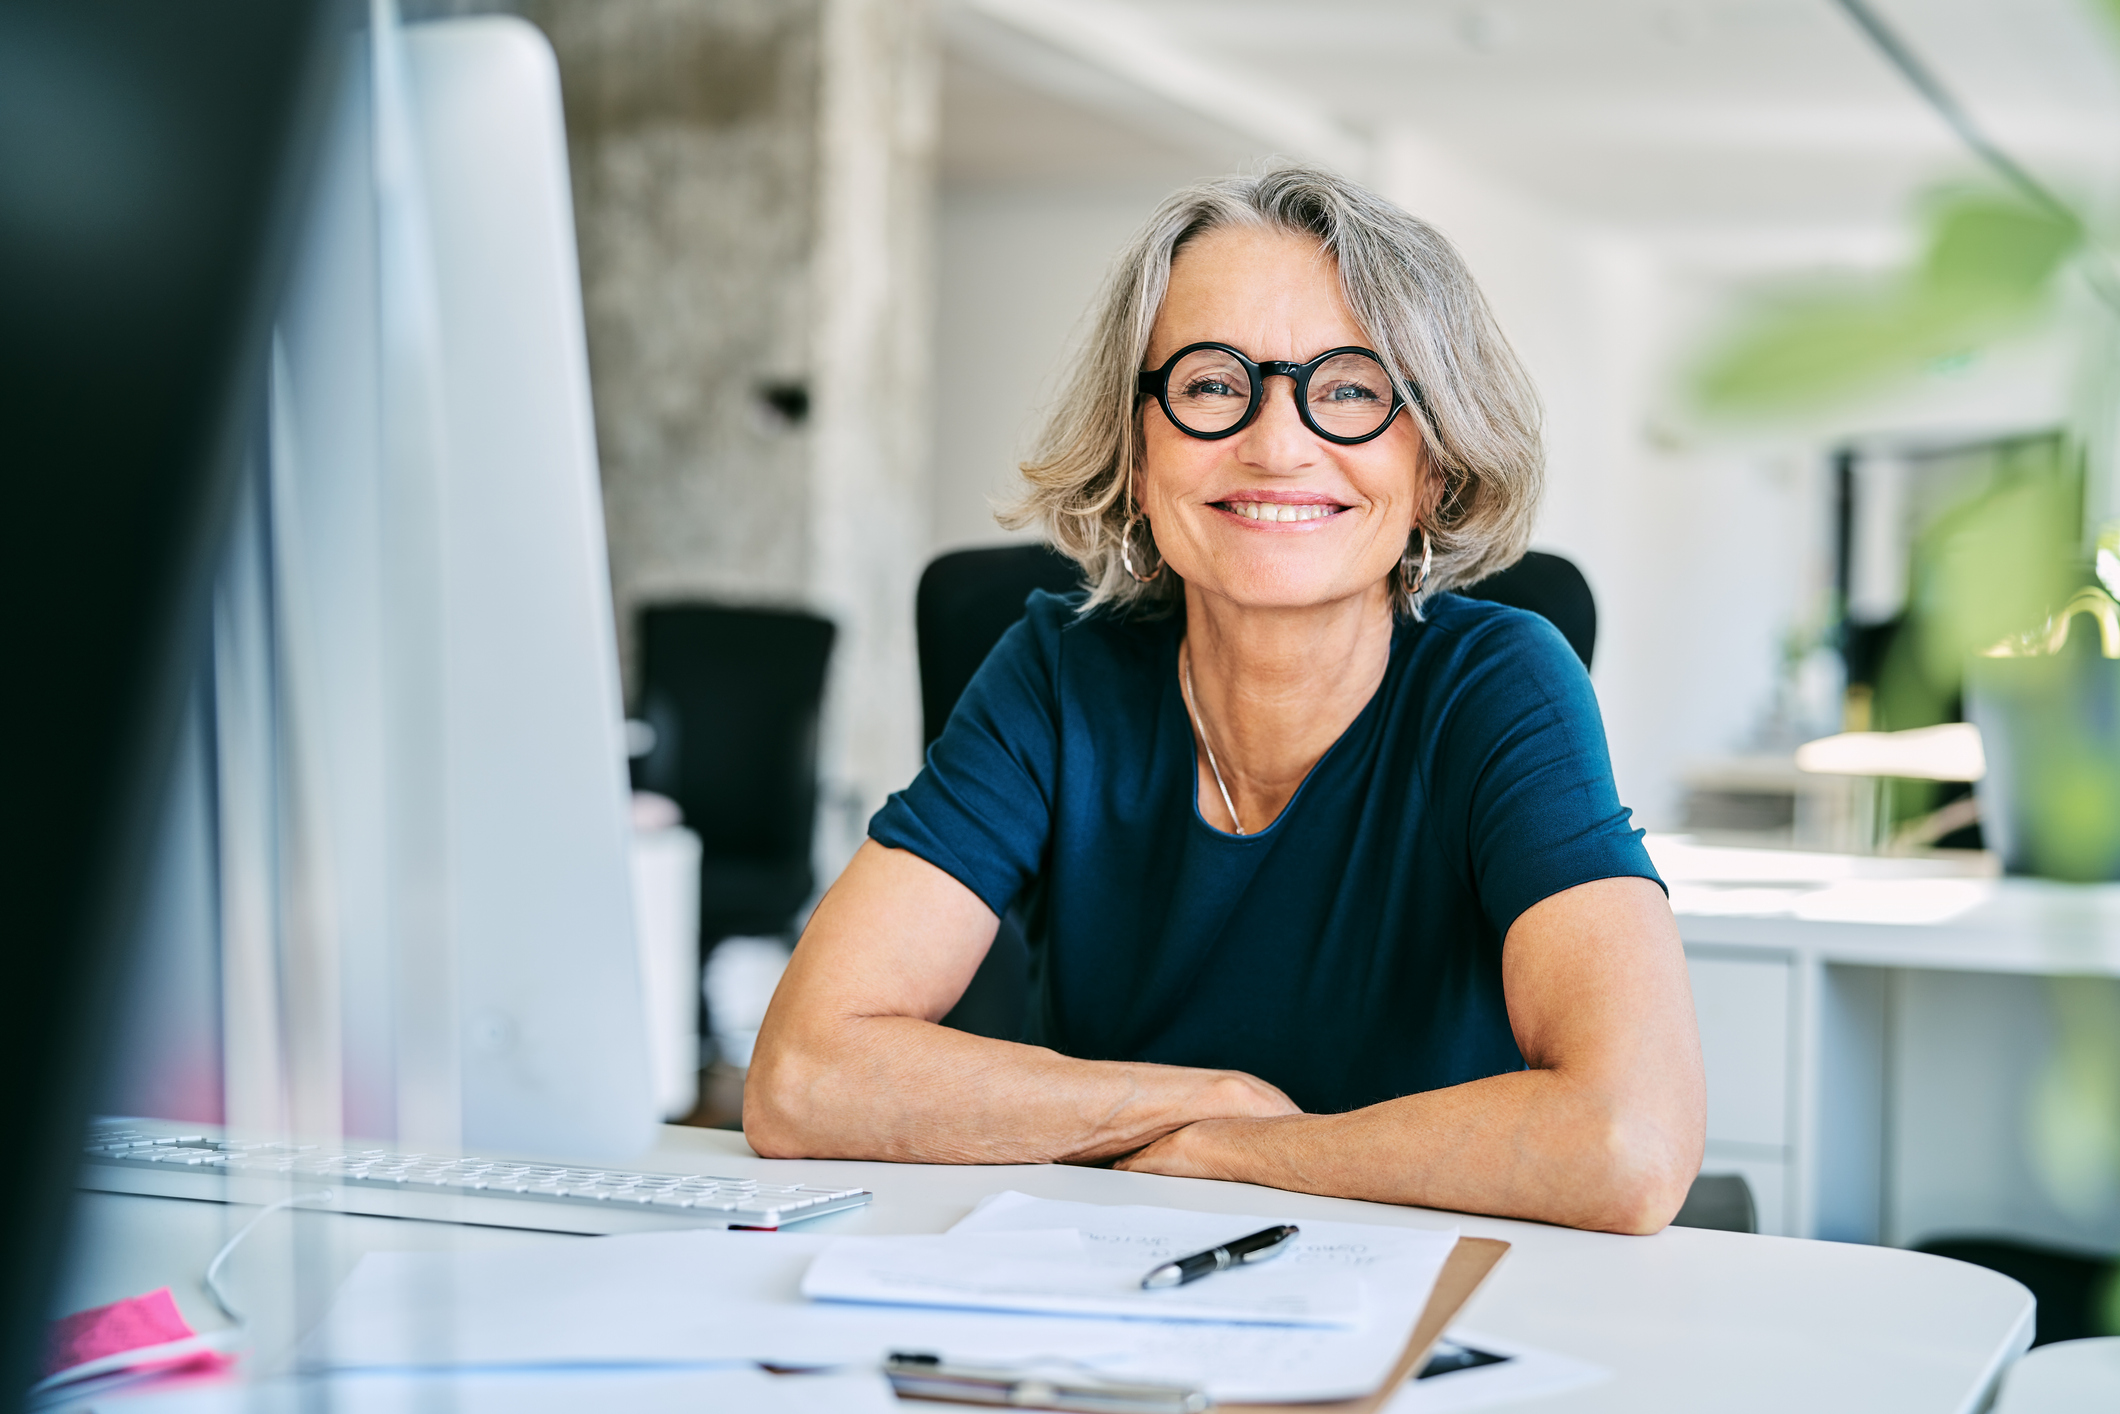 Smiling businesswoman at desk in office